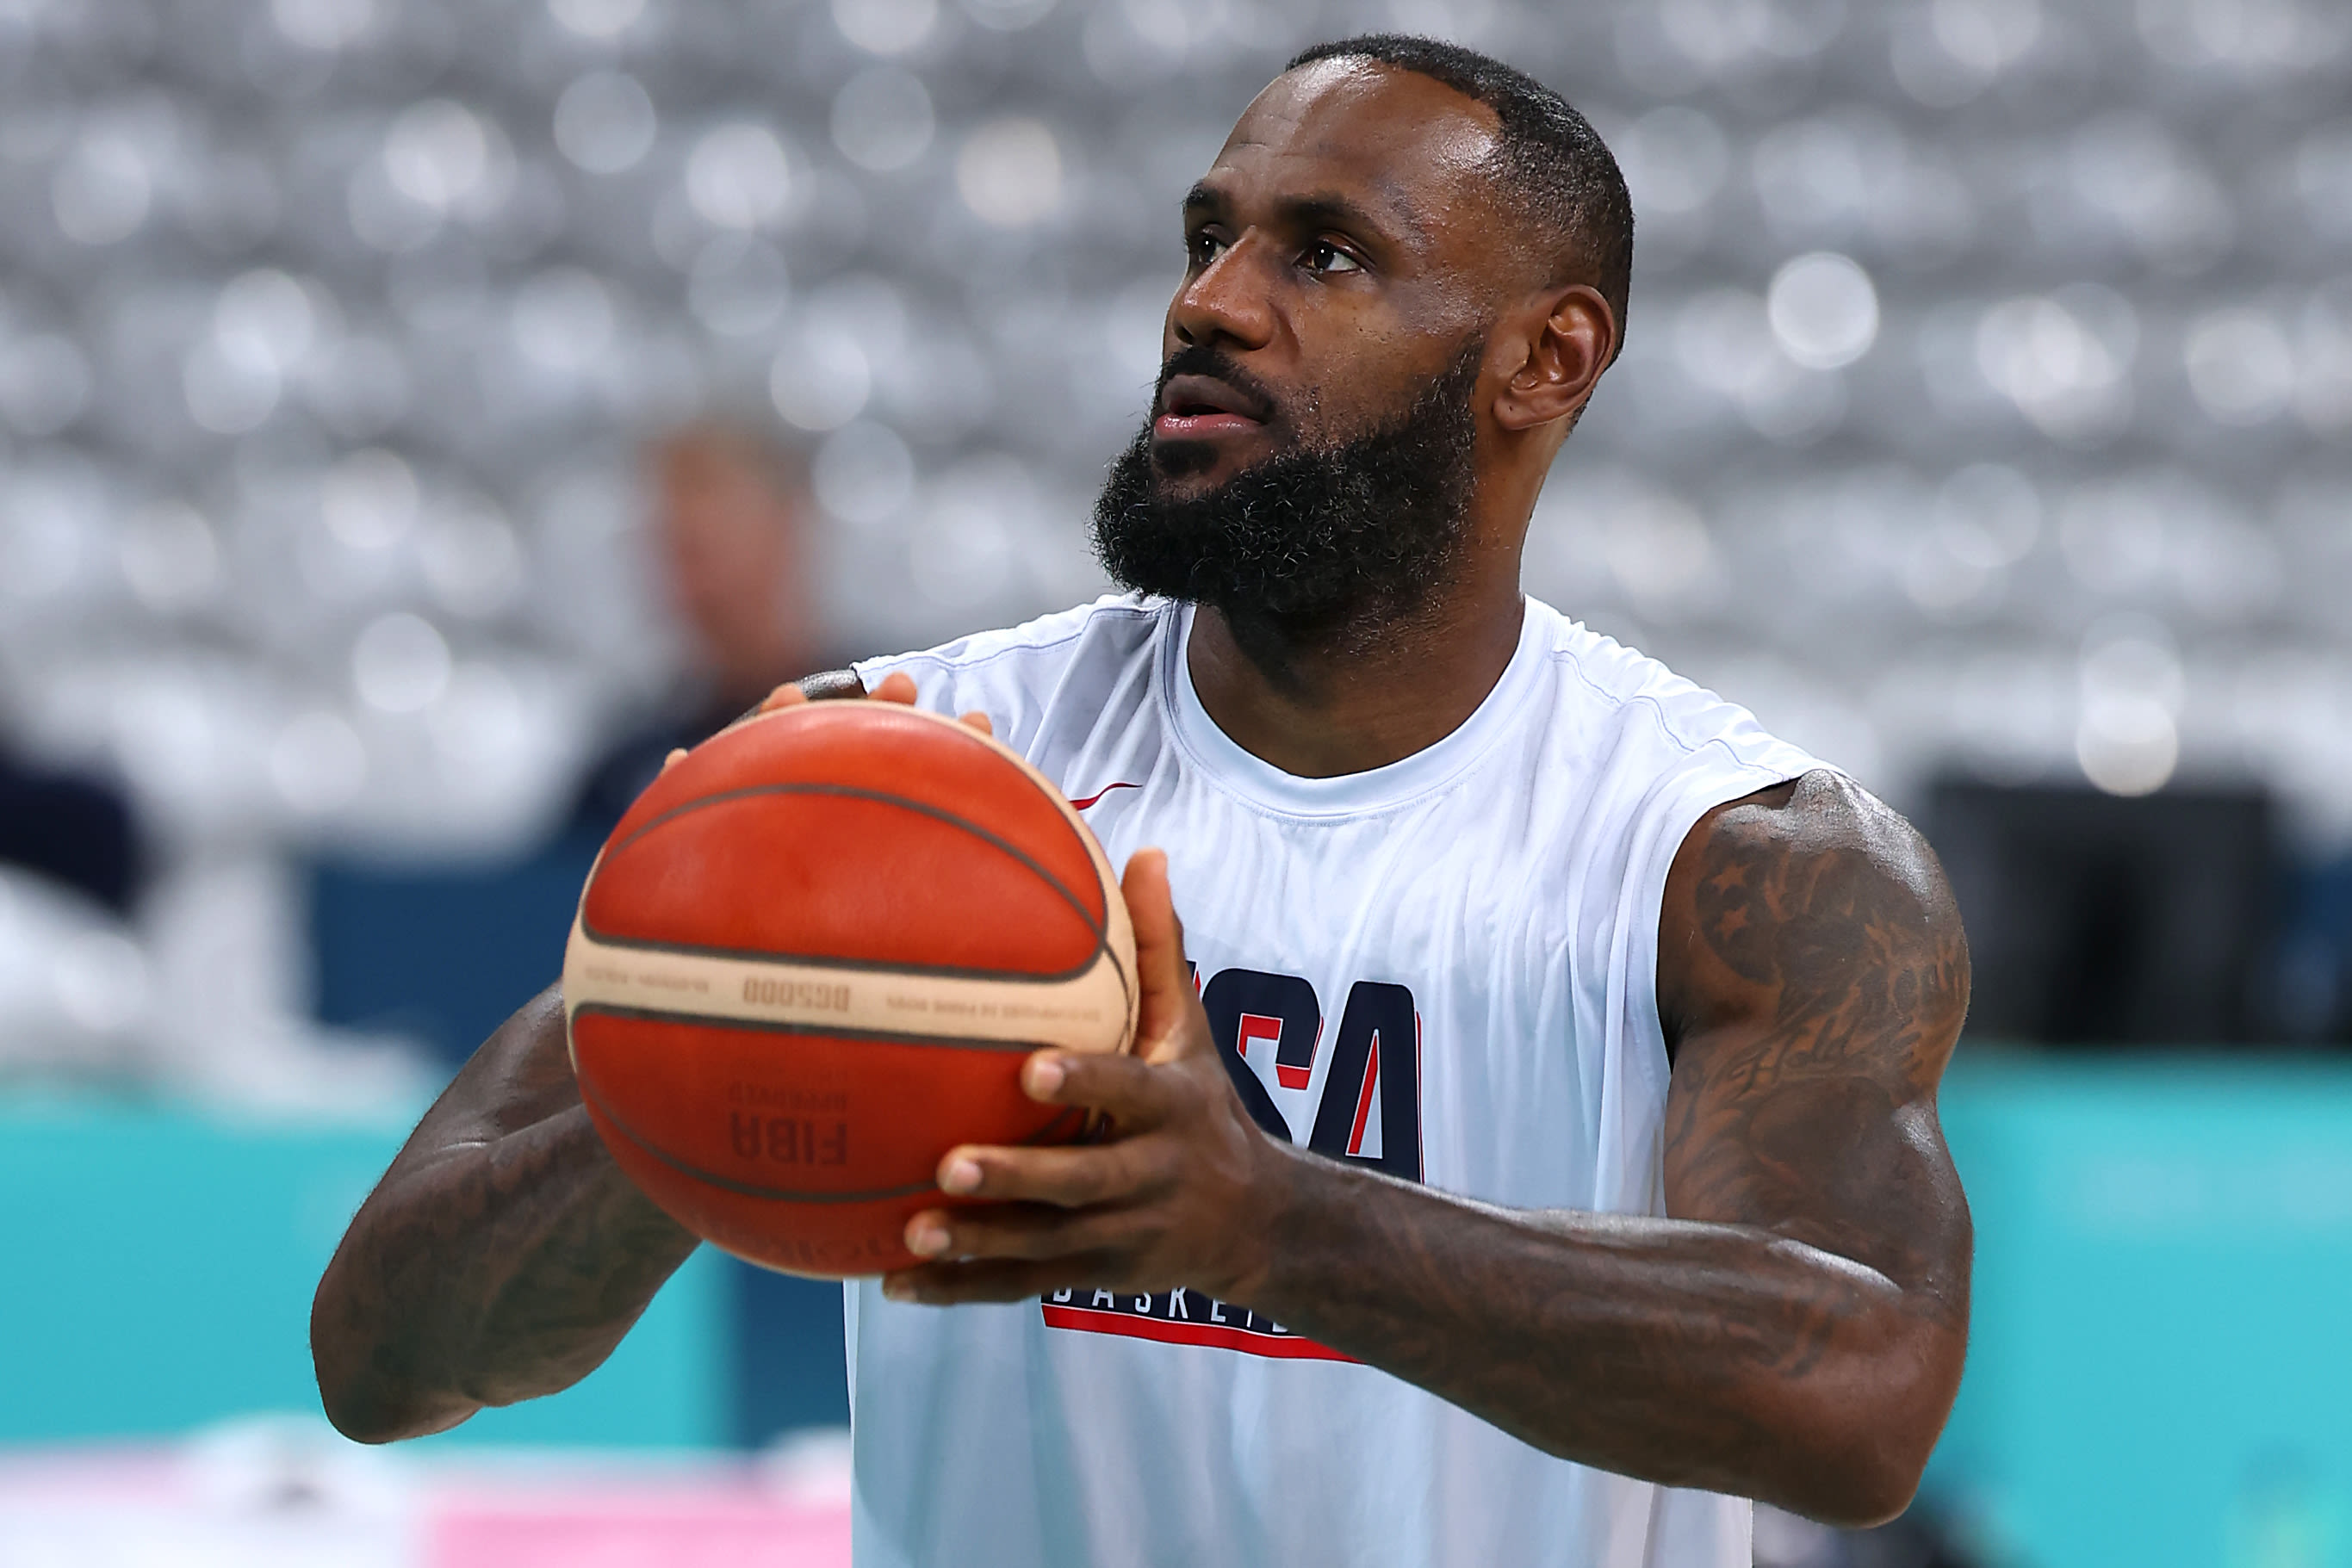 As LeBron James makes his Olympics return, here's everything you need to know about his Team USA career